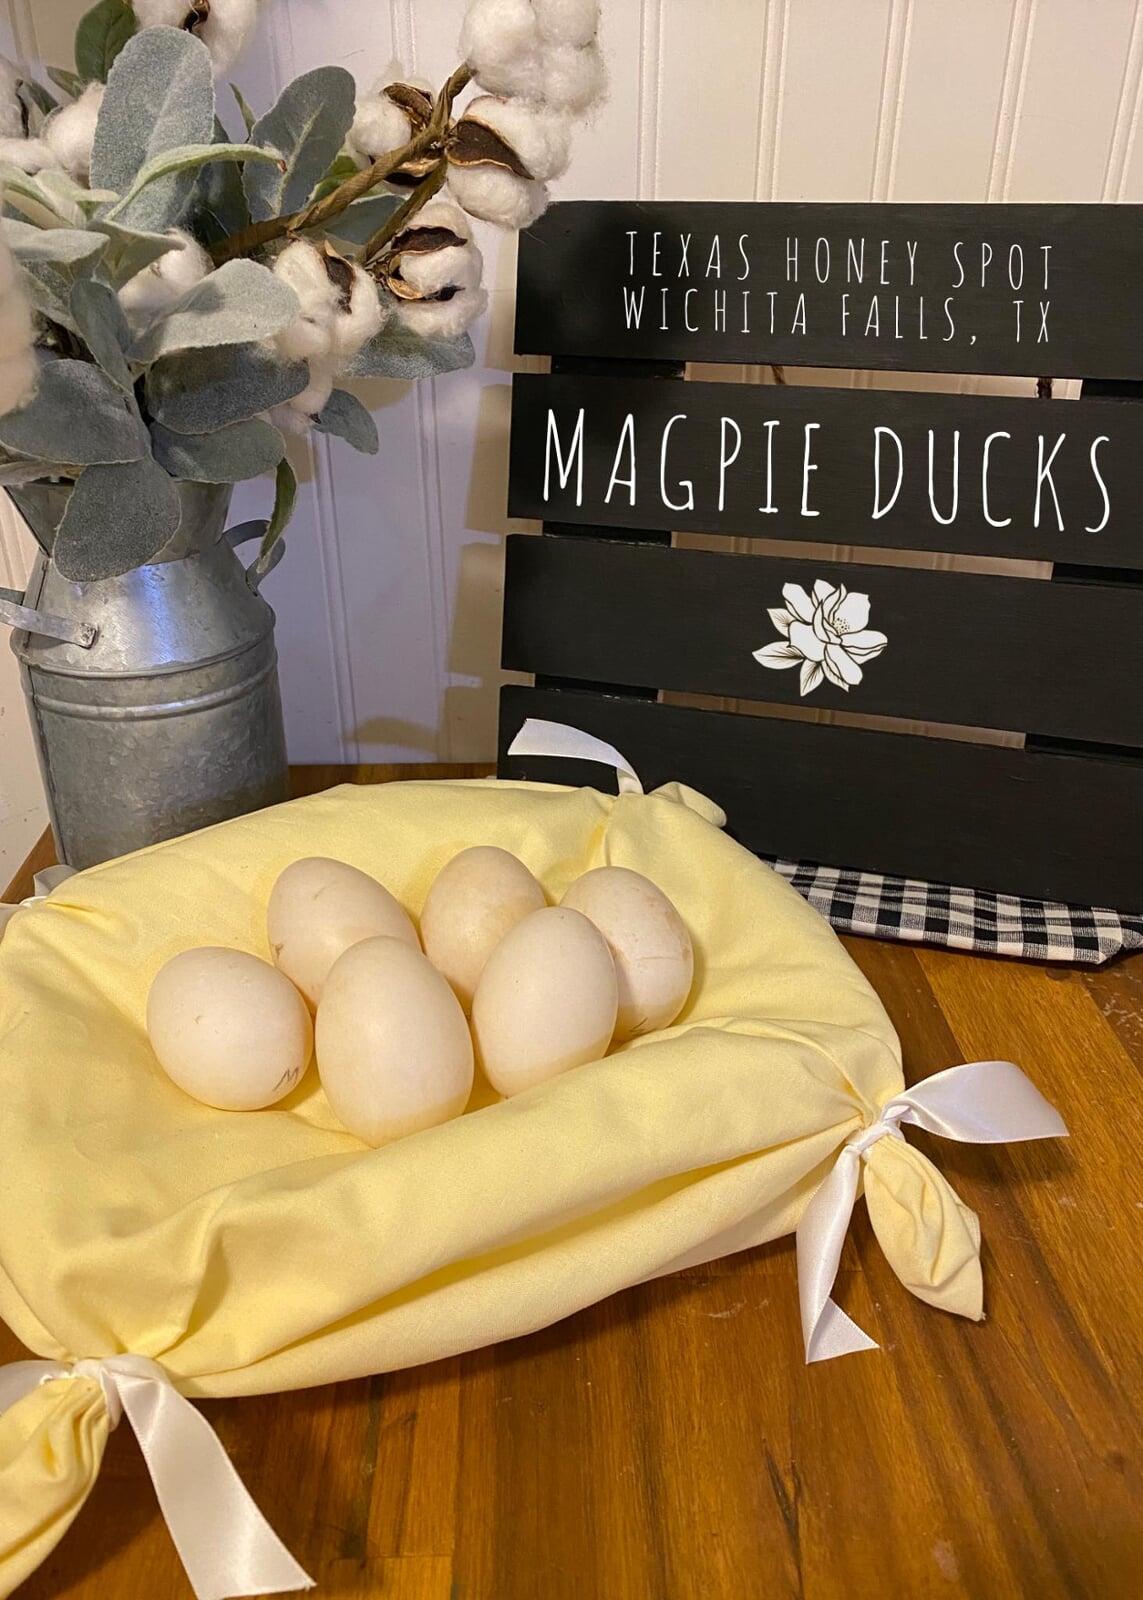 magpie duck eggs resting on yellow pillow with black board behind